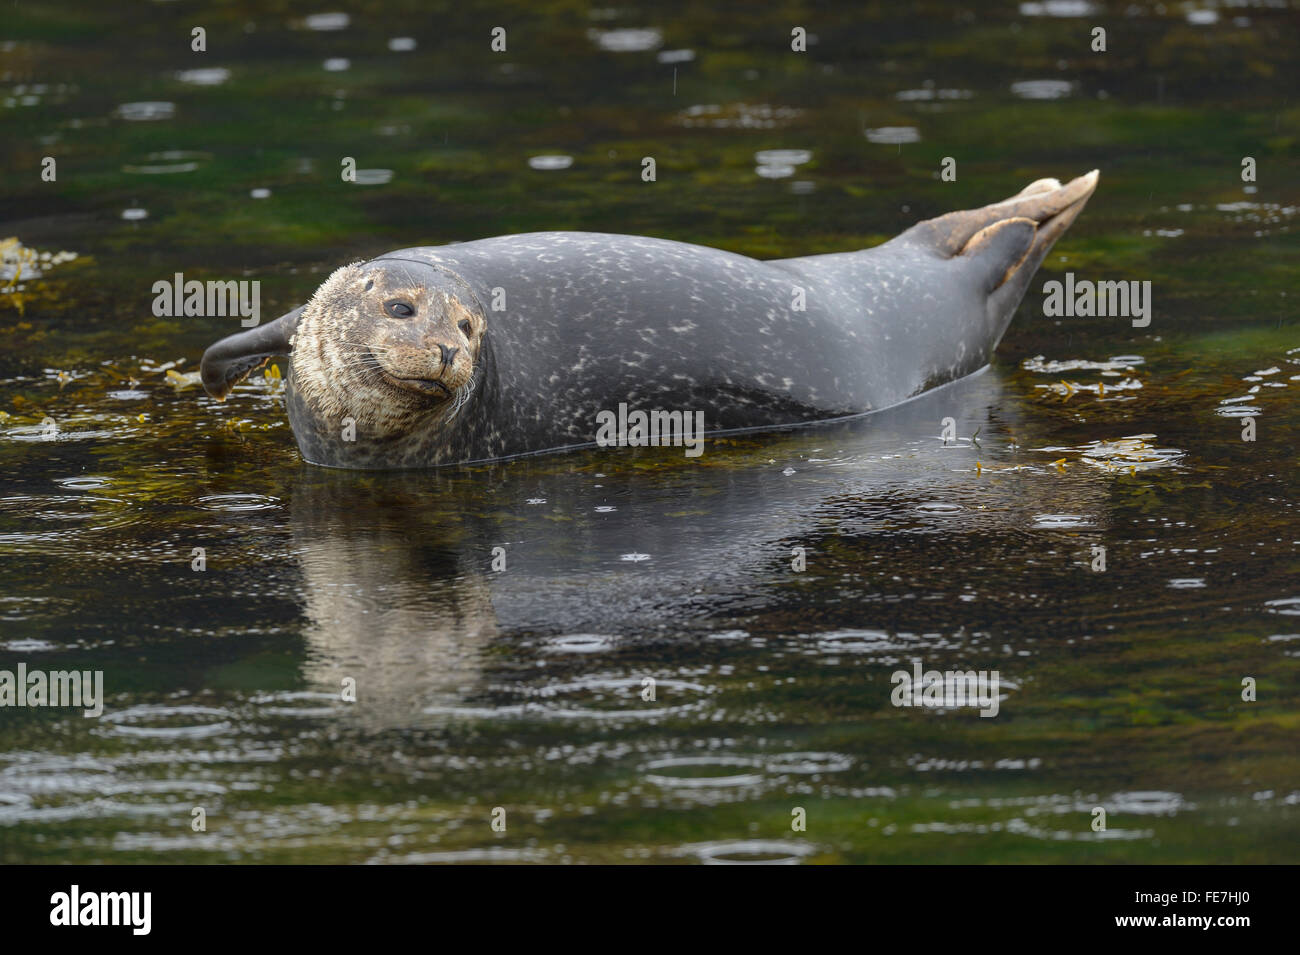 Common or harbour seal (Phoca vitulina) resting on stone in water, Arnarstapi, West Iceland, Iceland Stock Photo